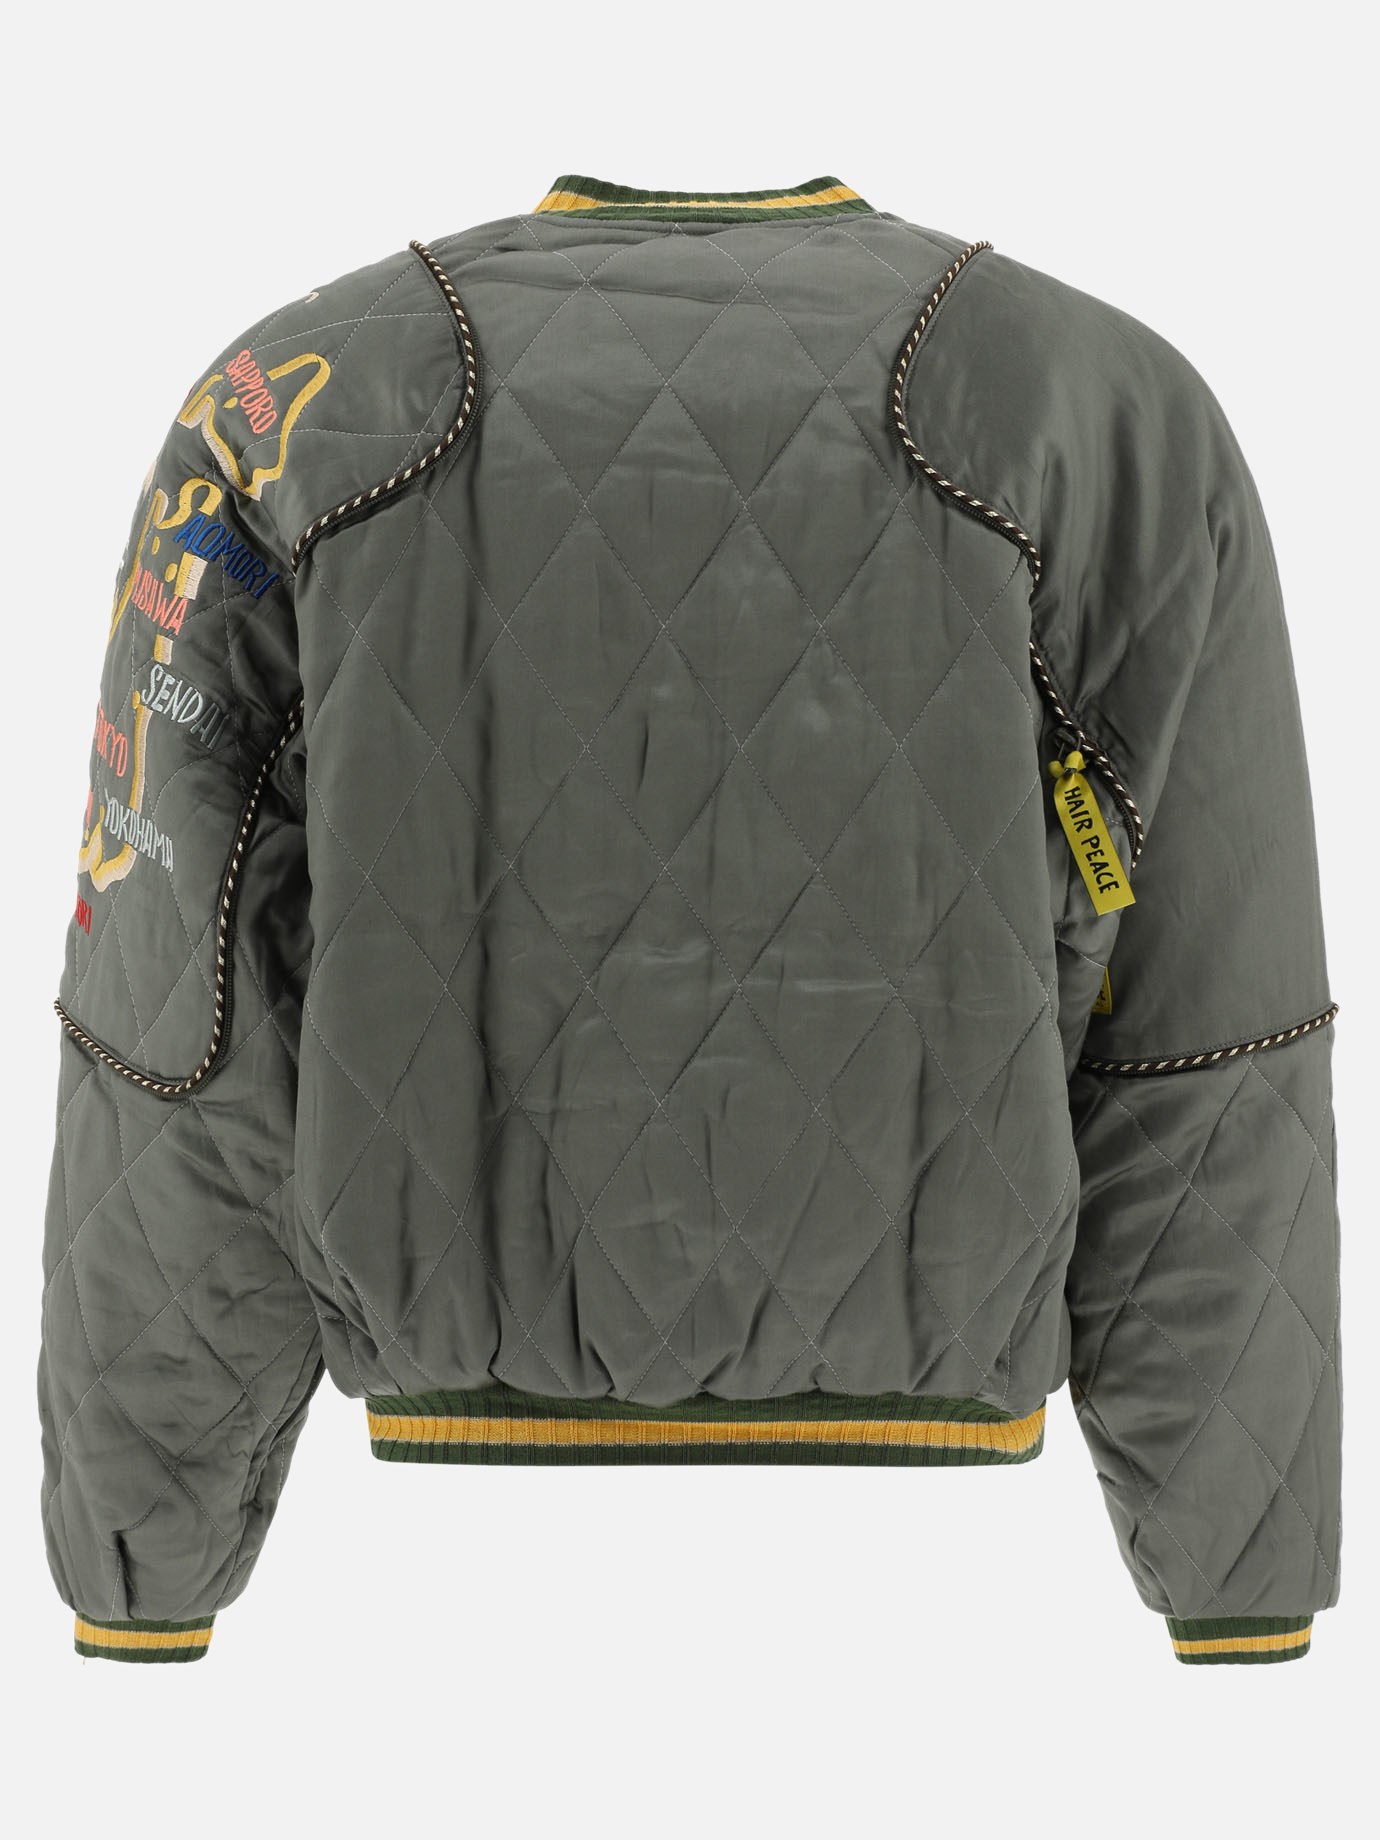 Quilted bomber jacket by Kapital